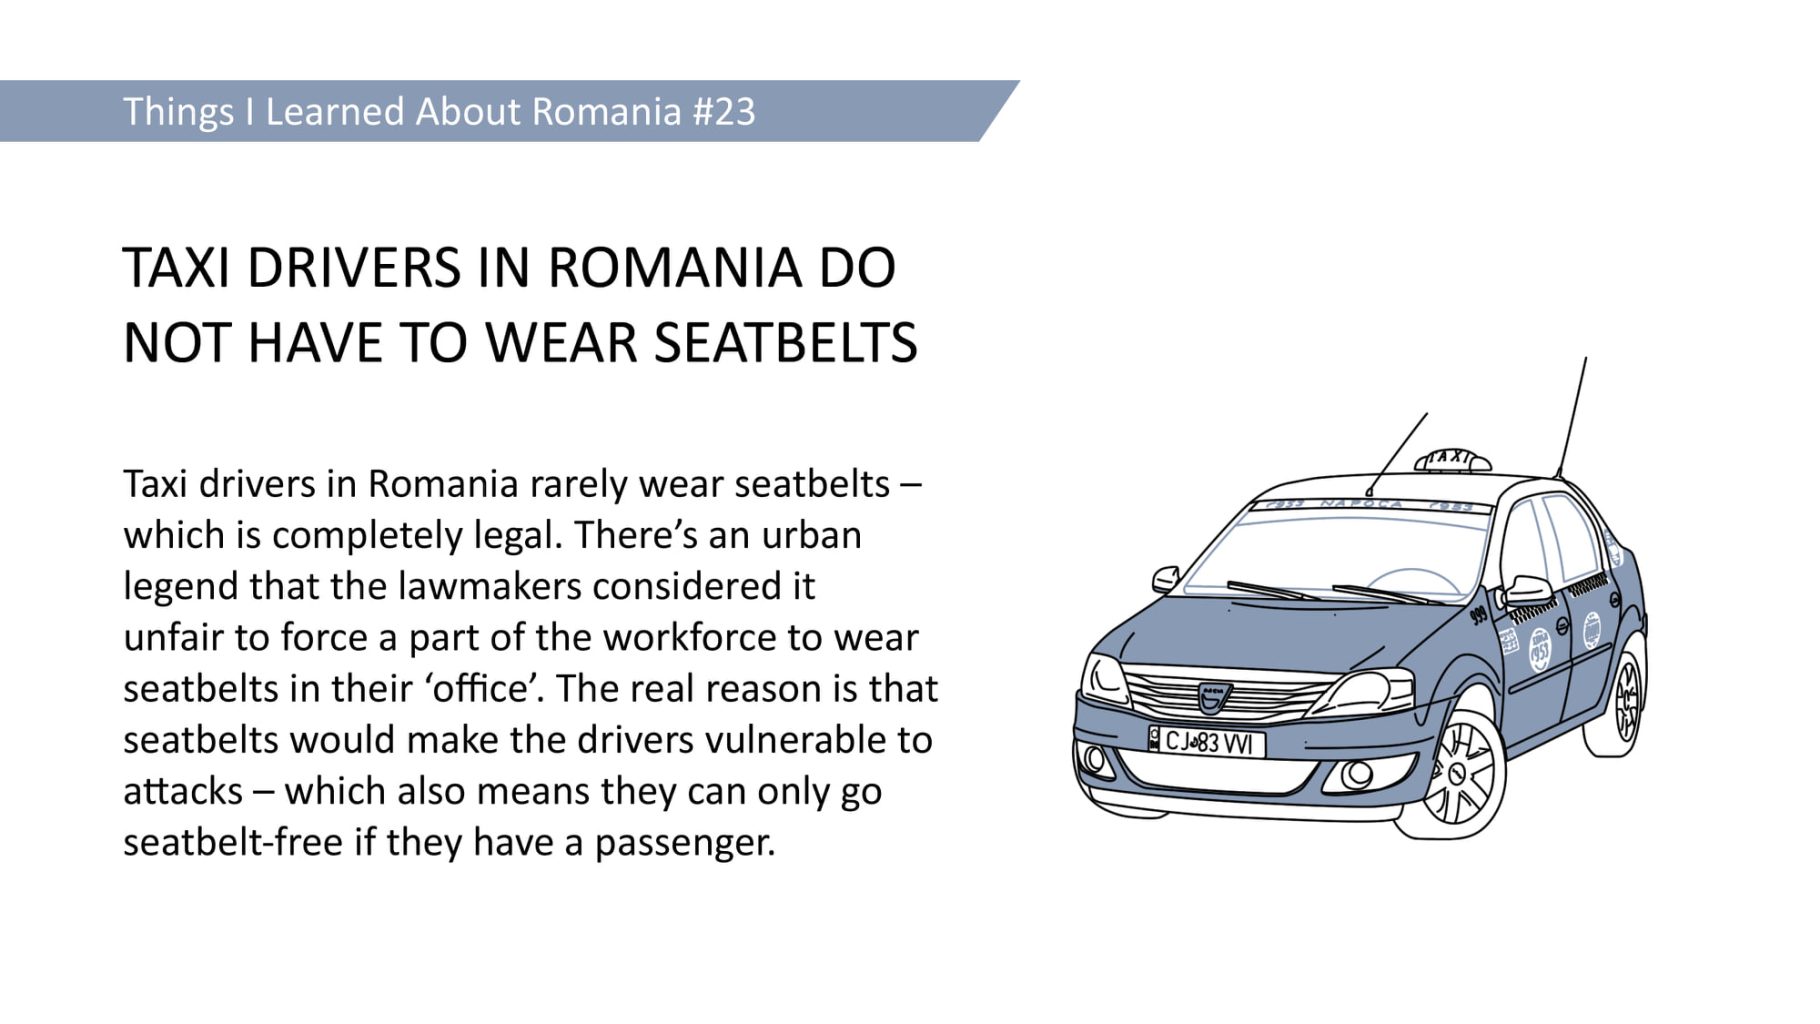 TAXI DRIVERS IN ROMANIA DO NOT HAVE TO WEAR SEATBELTS - Taxi drivers in Romania rarely wear seatbelts which is completely legal. There's an urban legend that the lawmakers considered it unfair to force a part of the workforce to wear seatbelts in their 'office'. The real reason is that seatbelts would make the drivers vulnerable to attacks - which also means they can only go seatbelt-free if they have a passenger.